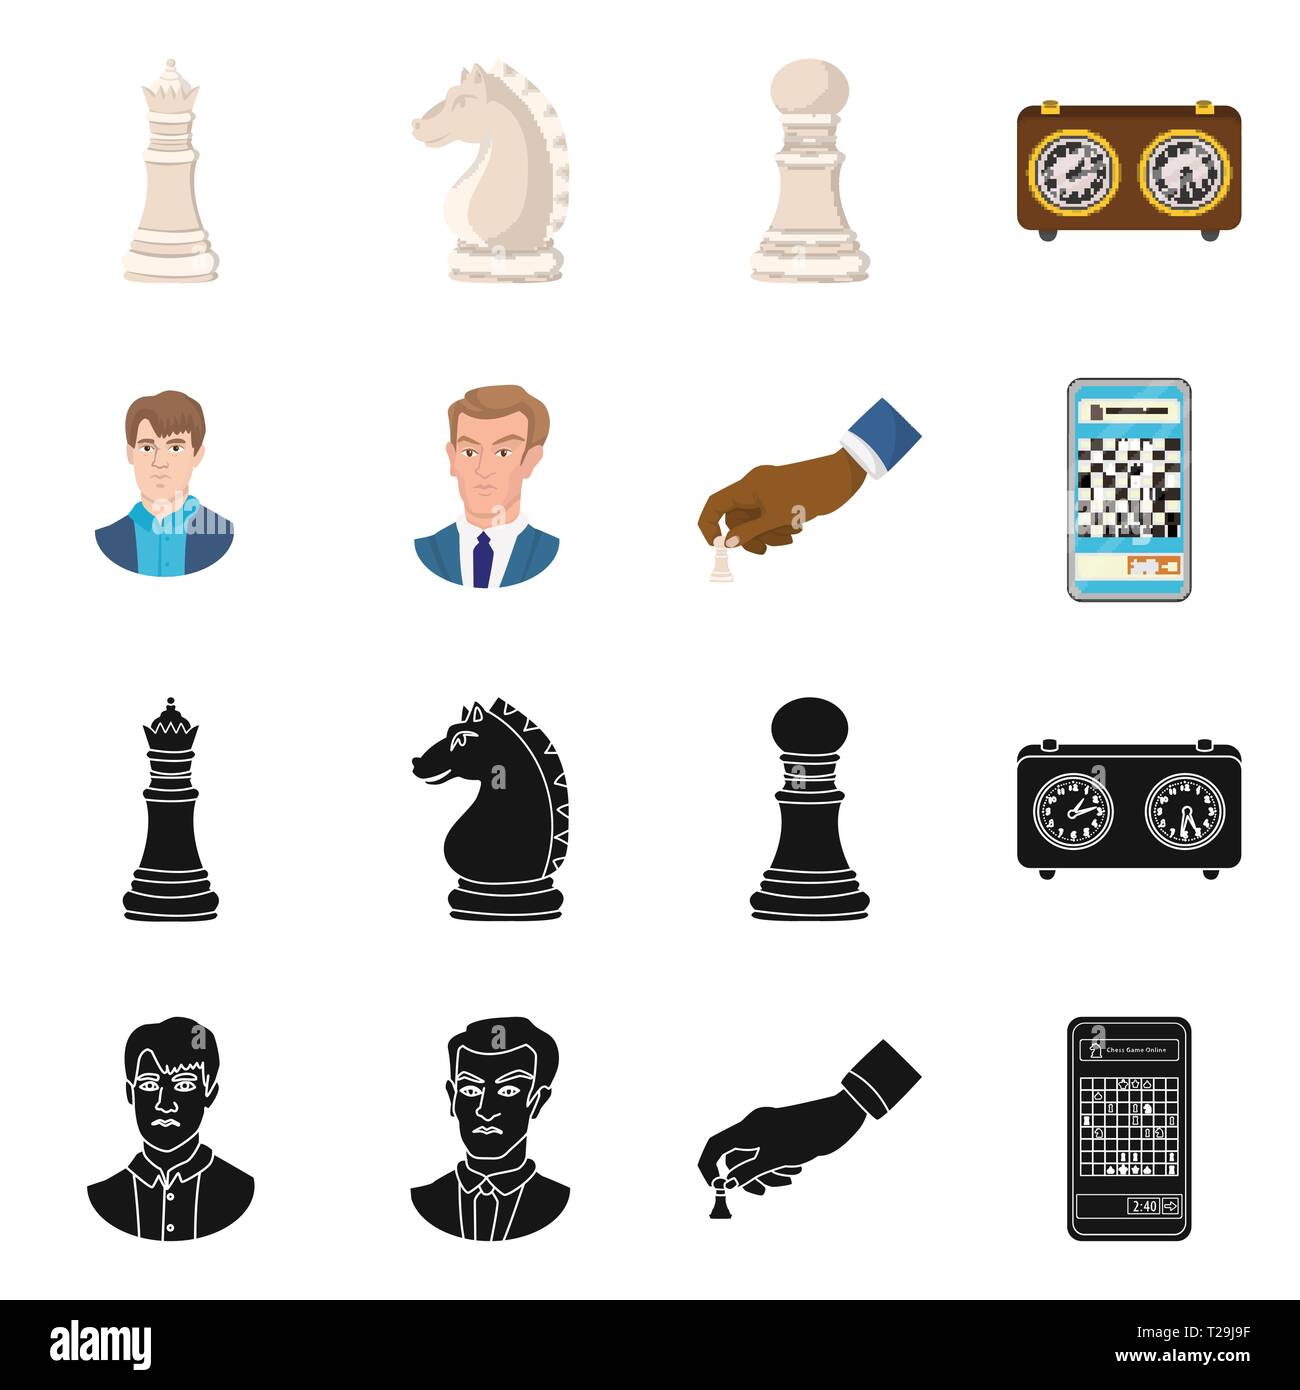 queen,knight,pawn,clock,man,hand,mobile,board,horse,timer,face,businessman,app,white,speed,male,profile,concept,phone,mate,figure,young,business,technology,check,head,counter,button,guy,African,checkmate,thin,club,target,chess,game,piece,strategy,tactical,play,set,vector,icon,illustration,isolated,collection,design,element,graphic,sign Vector Vectors , Stock Vector